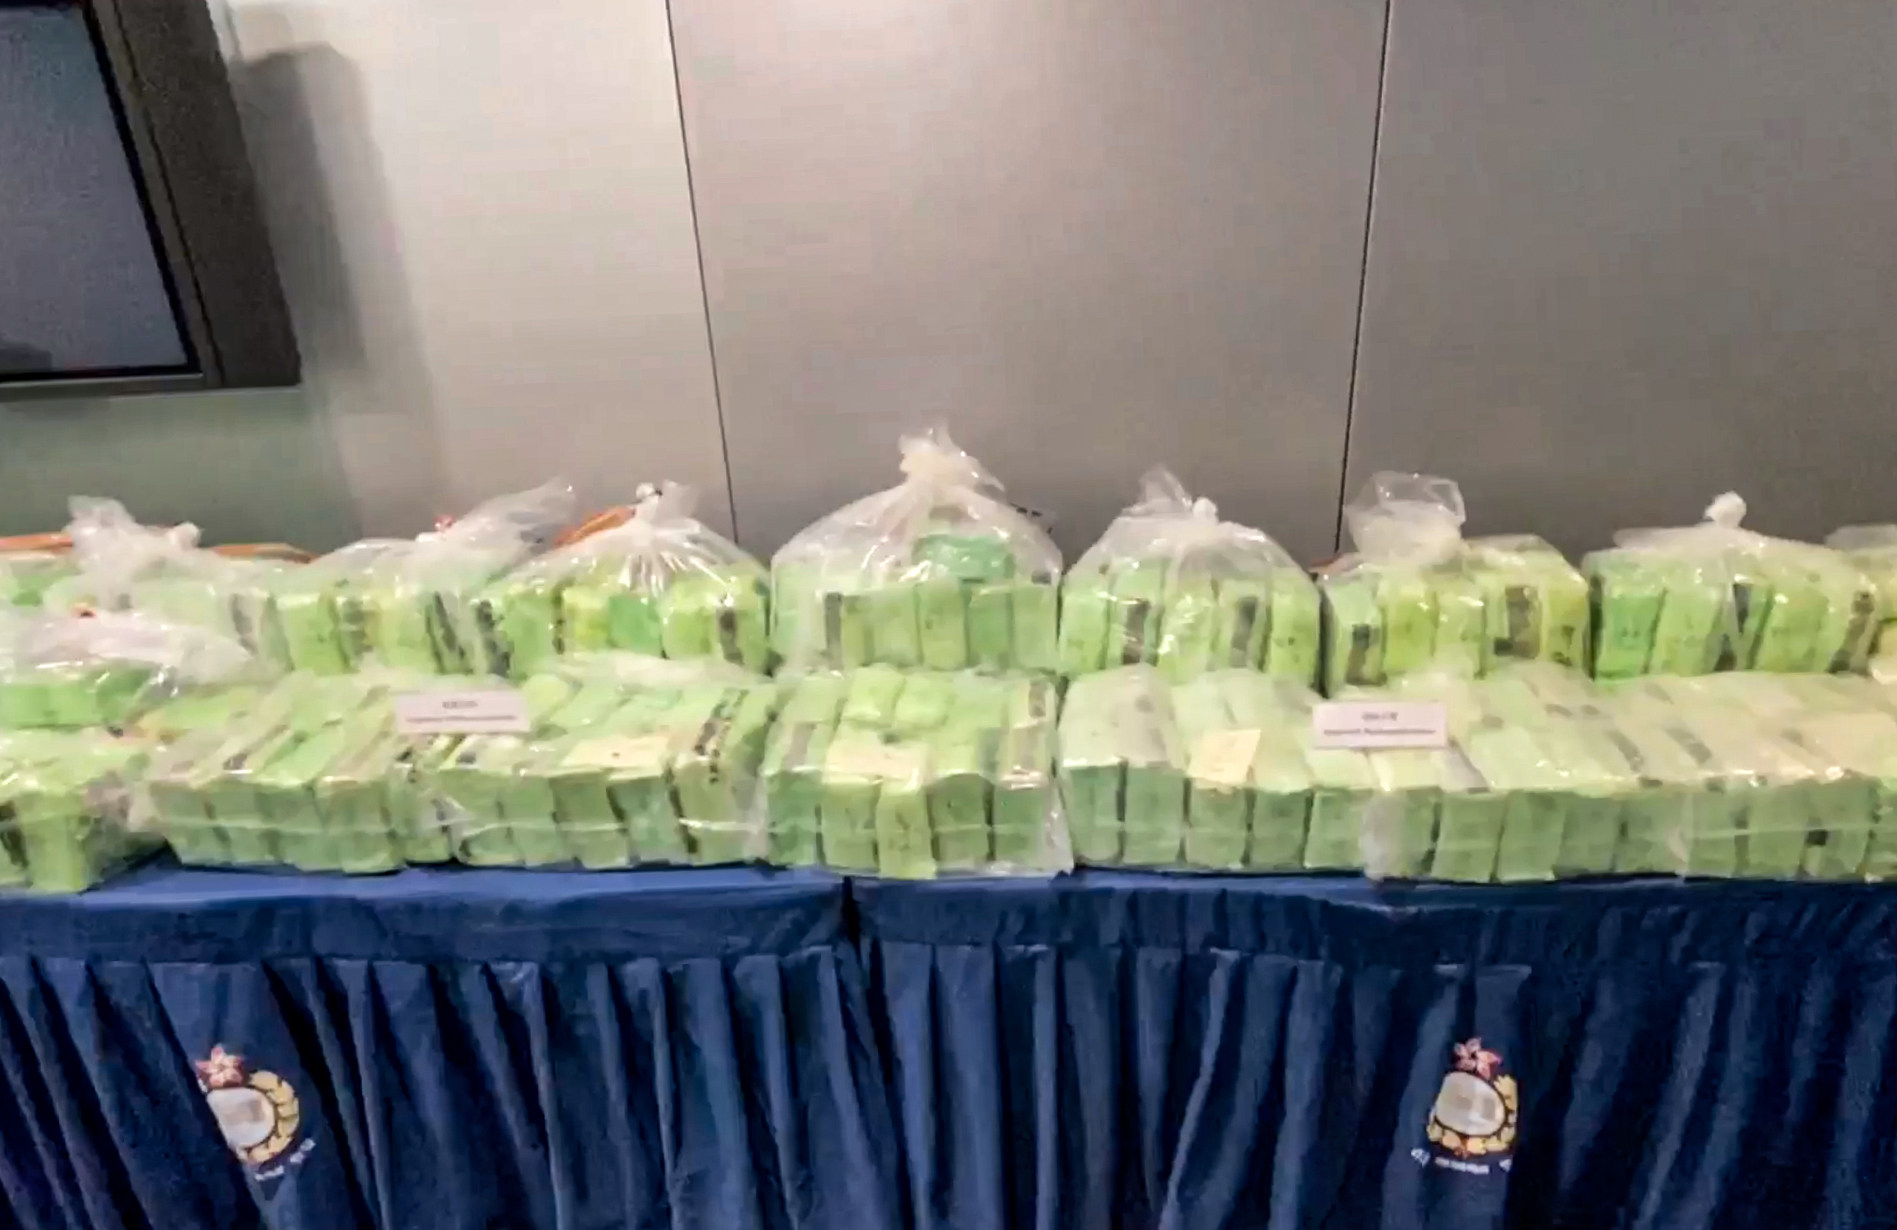 Suspected crystal meth seized in police raids worth an estimated HK$123 million. Photo: Handout